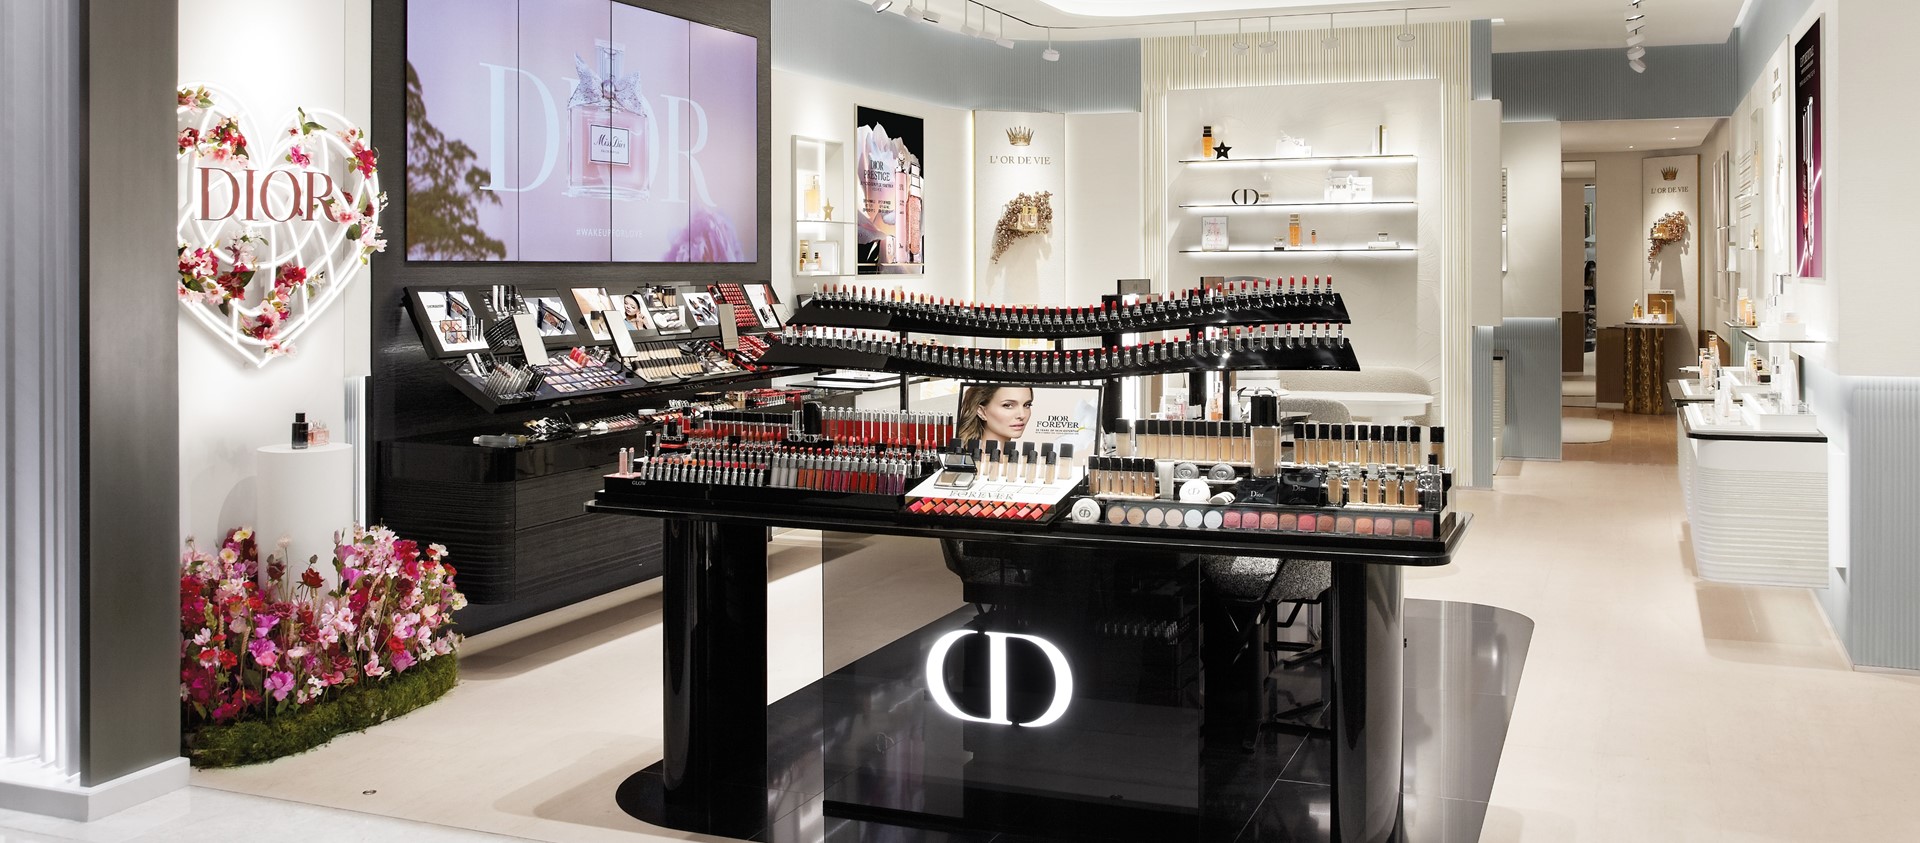 Dior Stores in Singapore  18 Locations  Opening Hours  SHOPSinSG